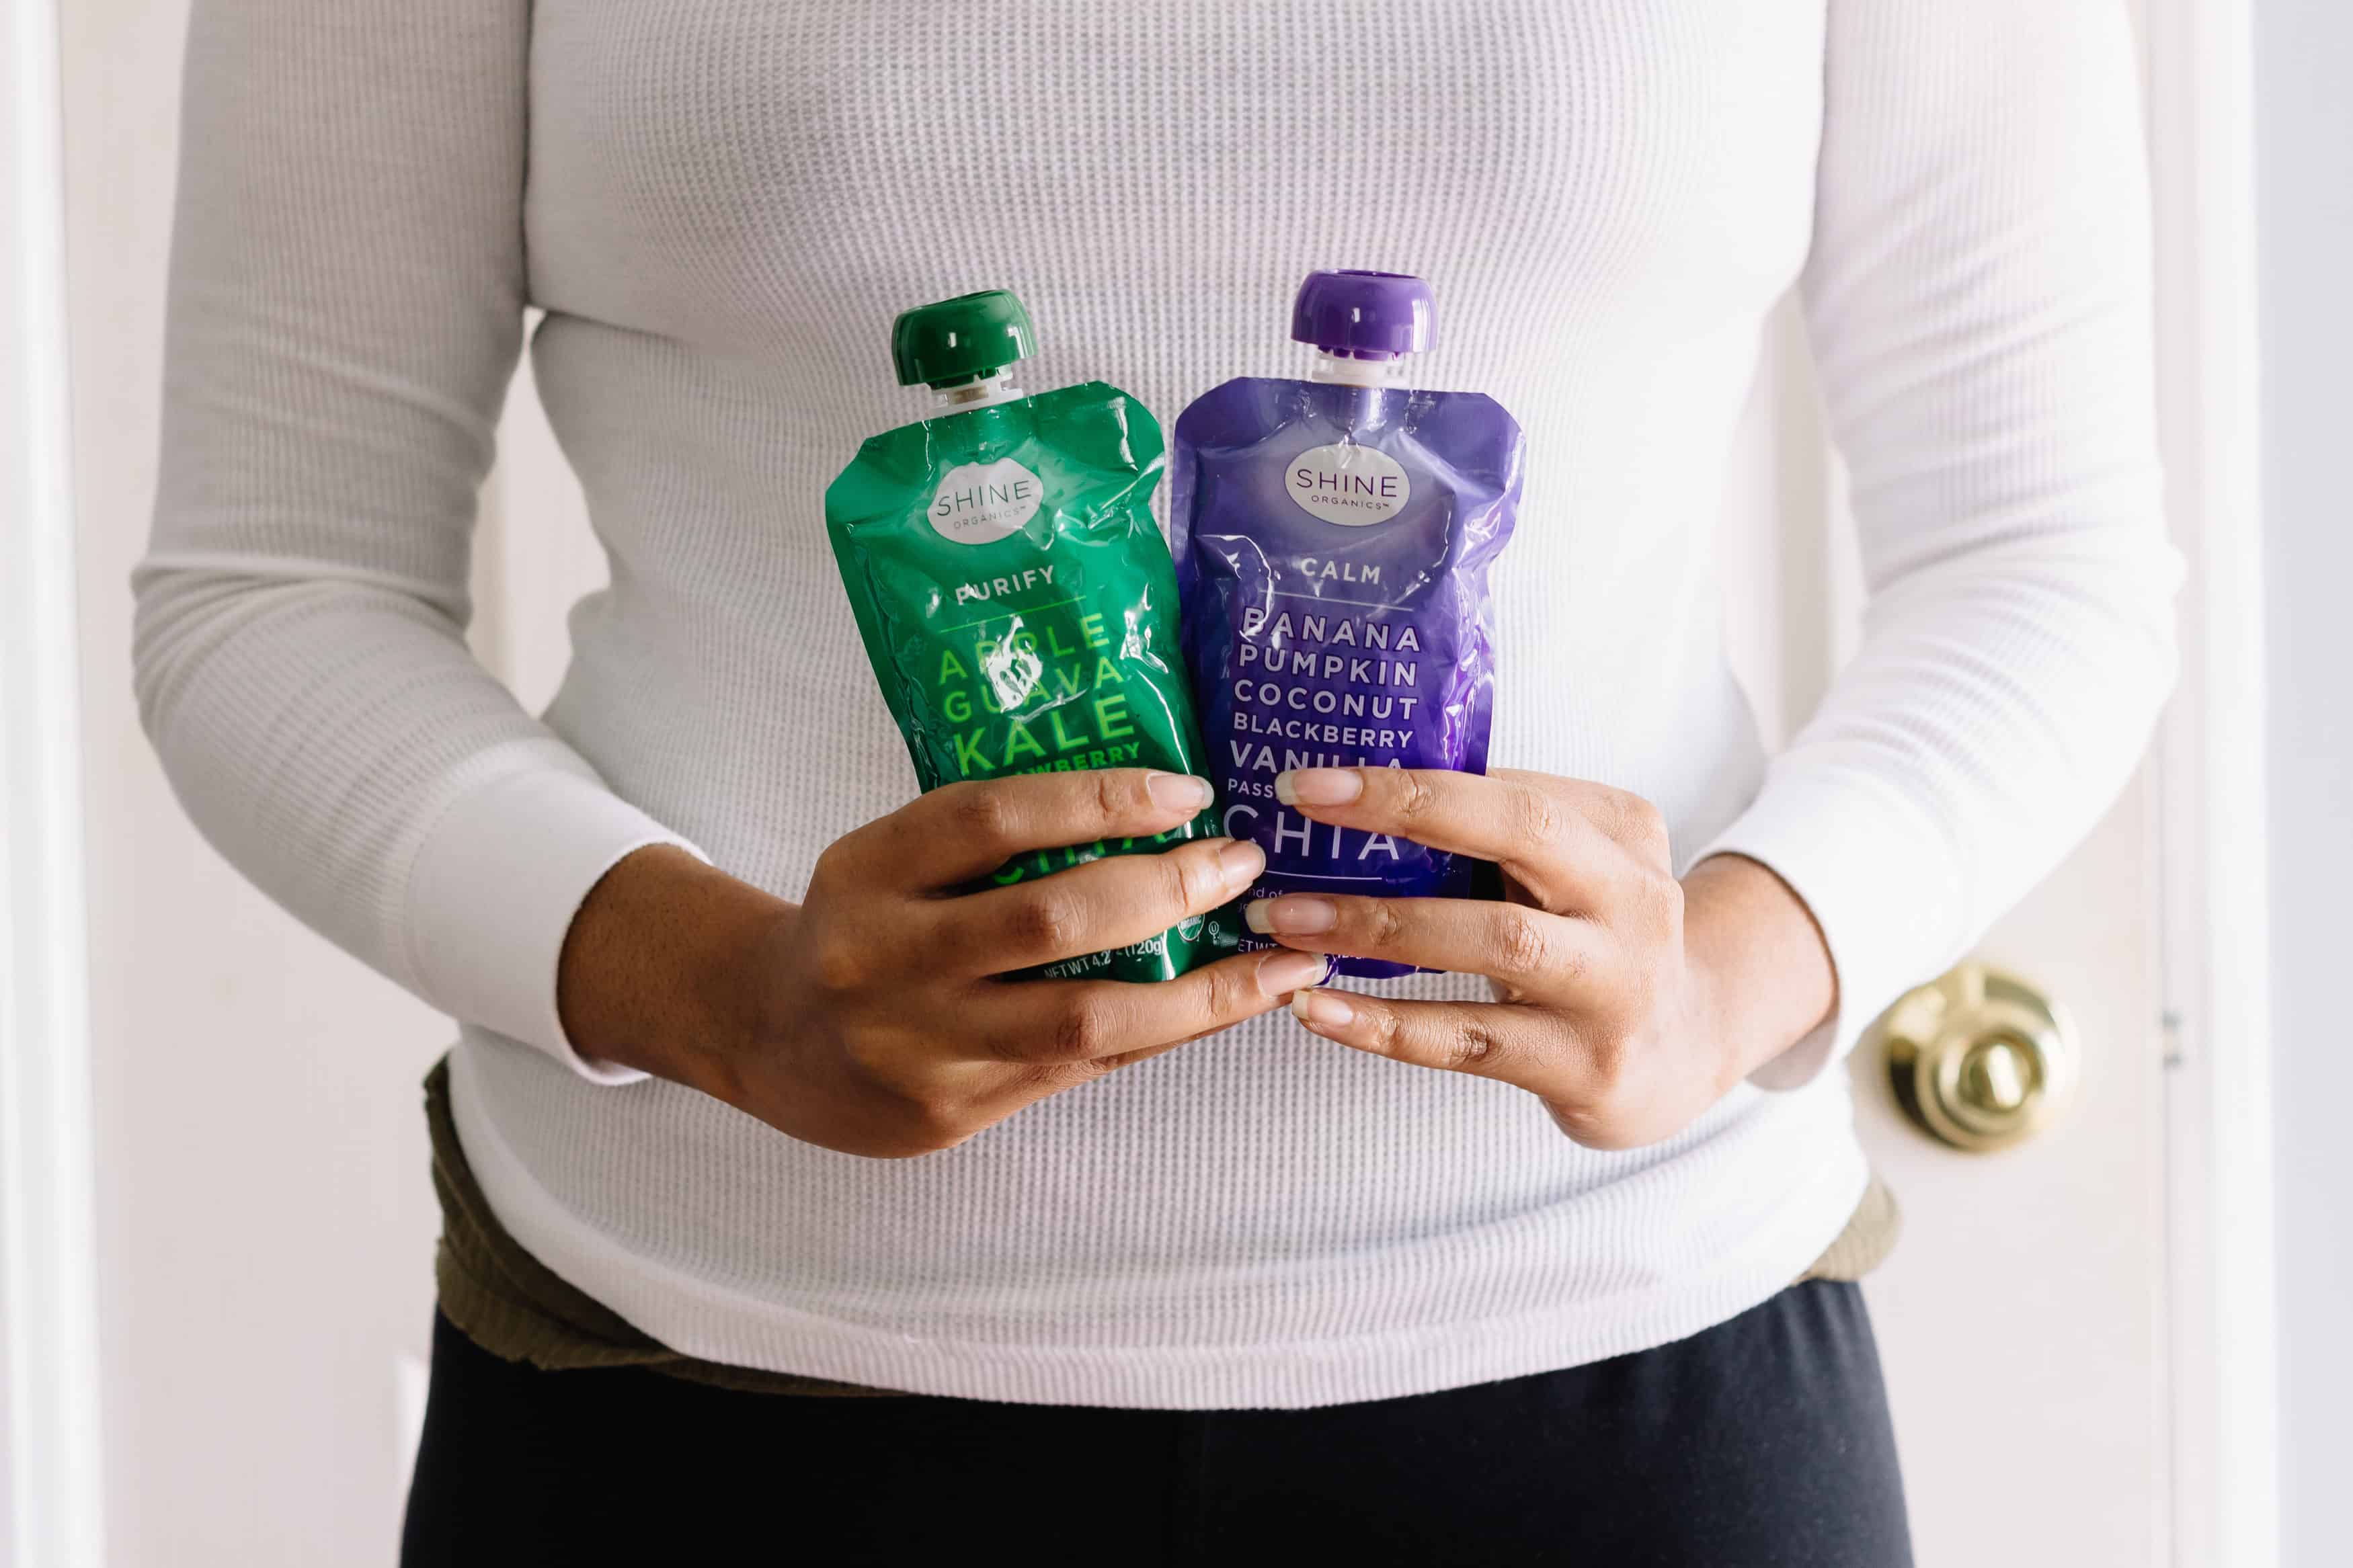 I really like Shine Organics because it provides you with all the delicious nutrition you need, when you need a quick snack before or after a workout. It's perfect for on-the-go!